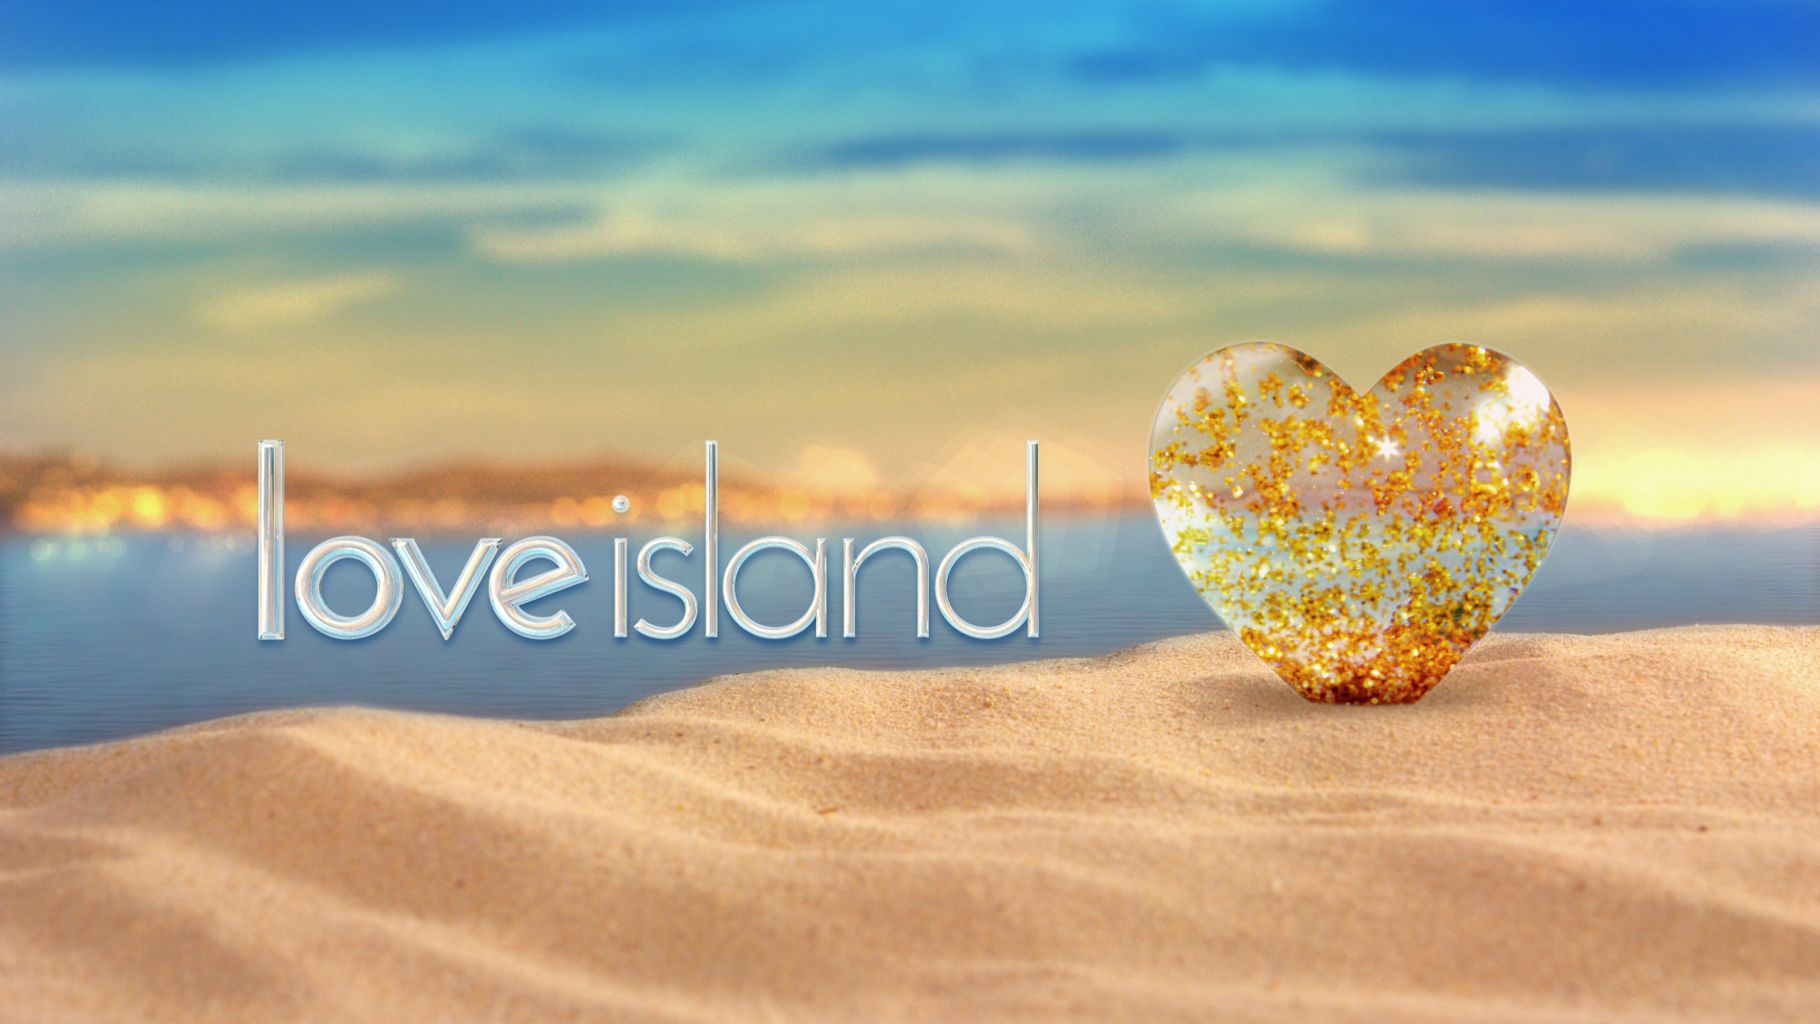 Who is Taylor Ward? Find out about the rumoured Love Island 2018 contestant